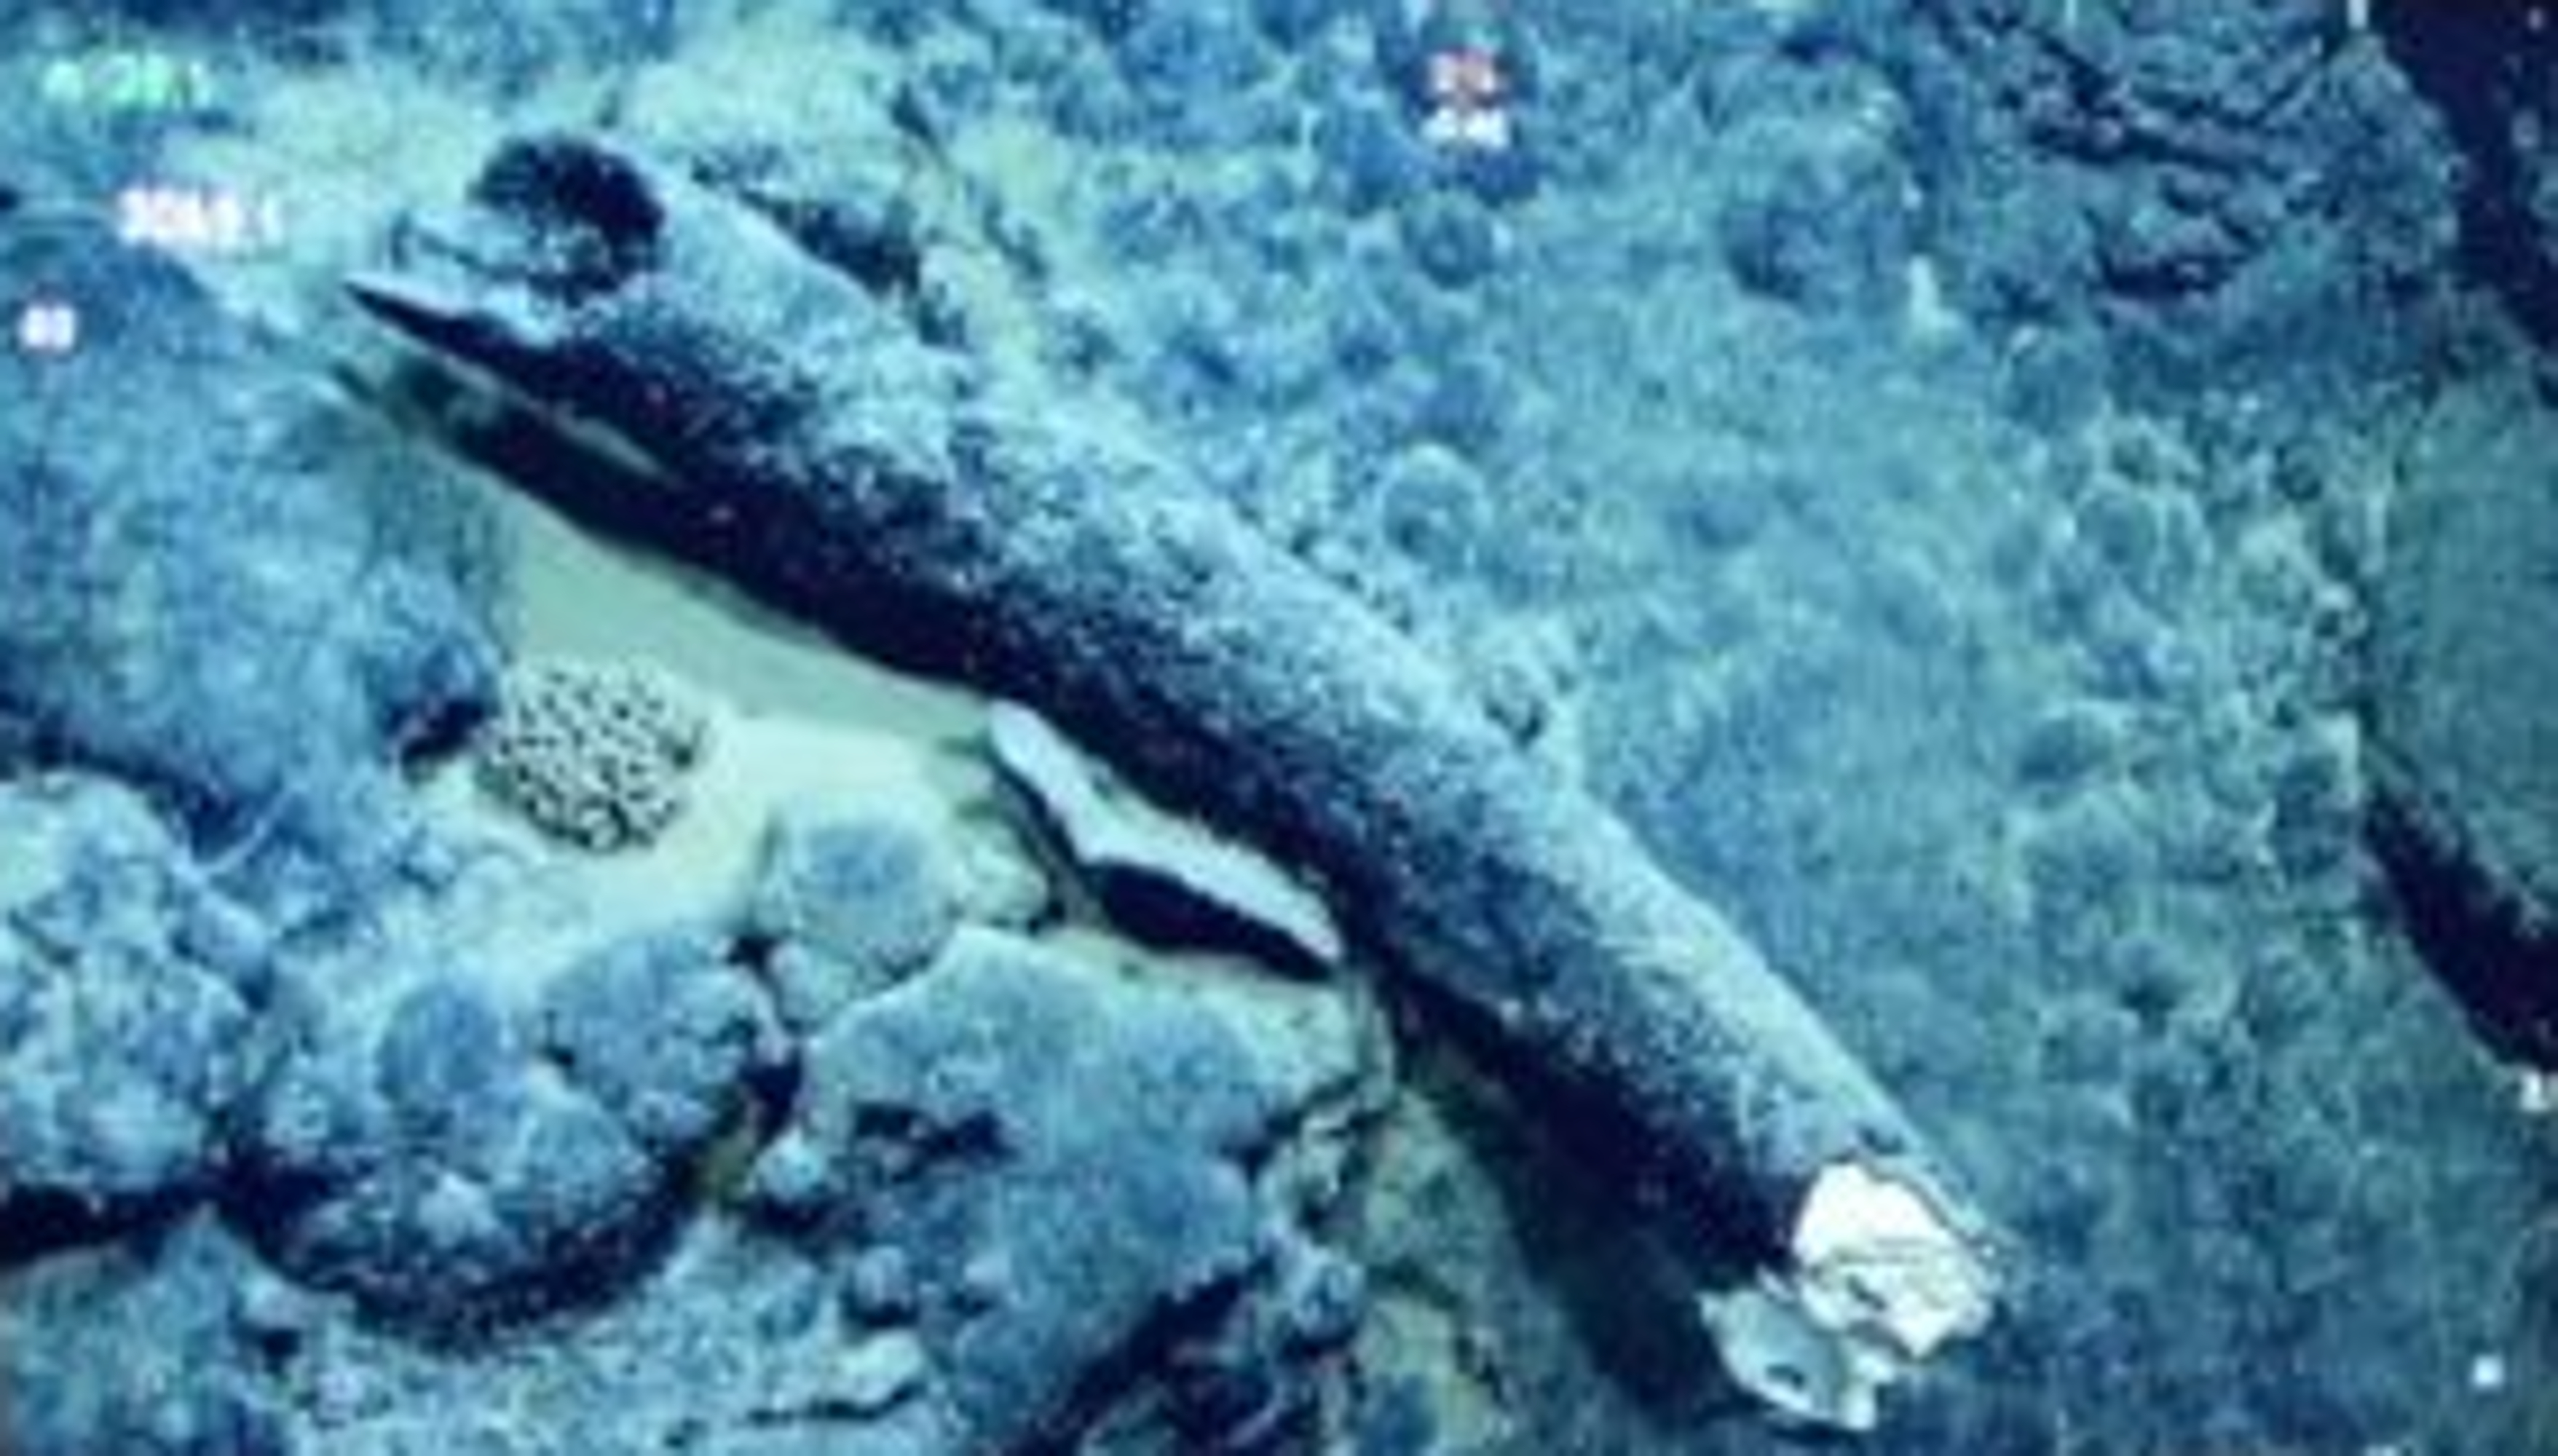 unbiased news Mammoth Tusk Discovered 10,000ft Below Pacific Ocean non politics news 